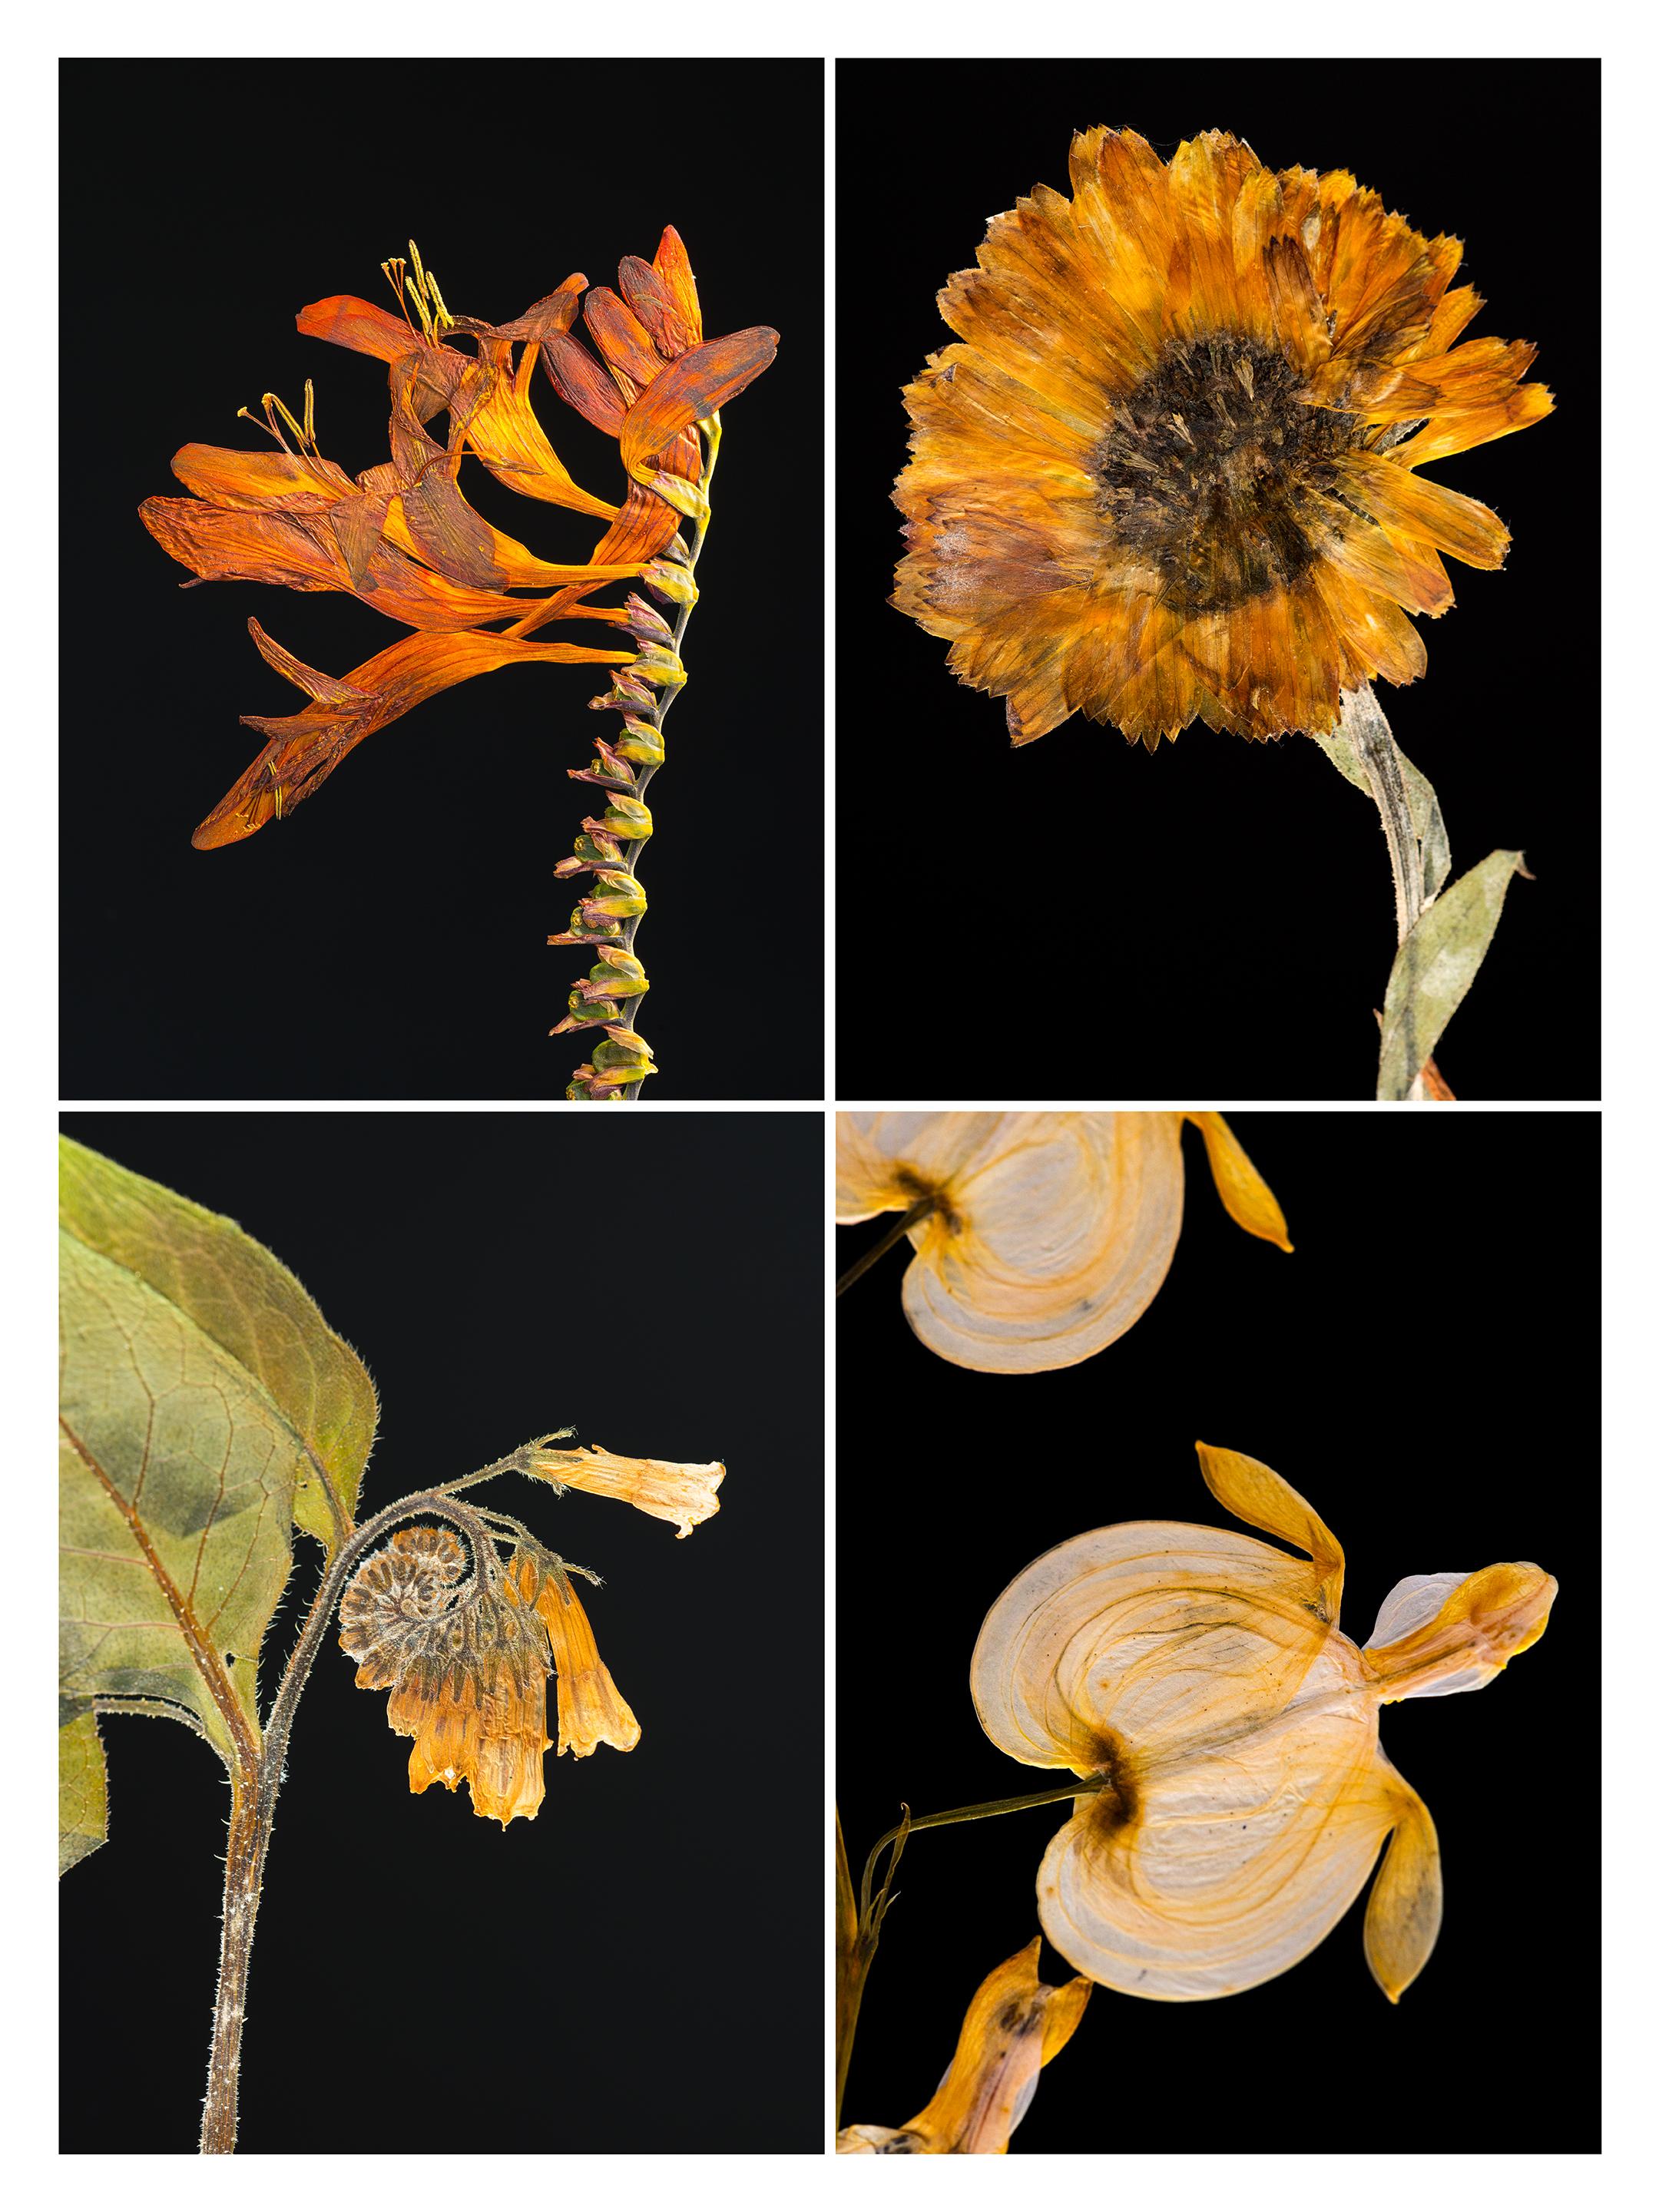 Martin’s innovative photographs are created from plants grown by himself in his garden and greenhouse in Cambridge. A keen horticulturist, he cultivates his own plants and flowers, the source of his art. His passion for gardening and a technical